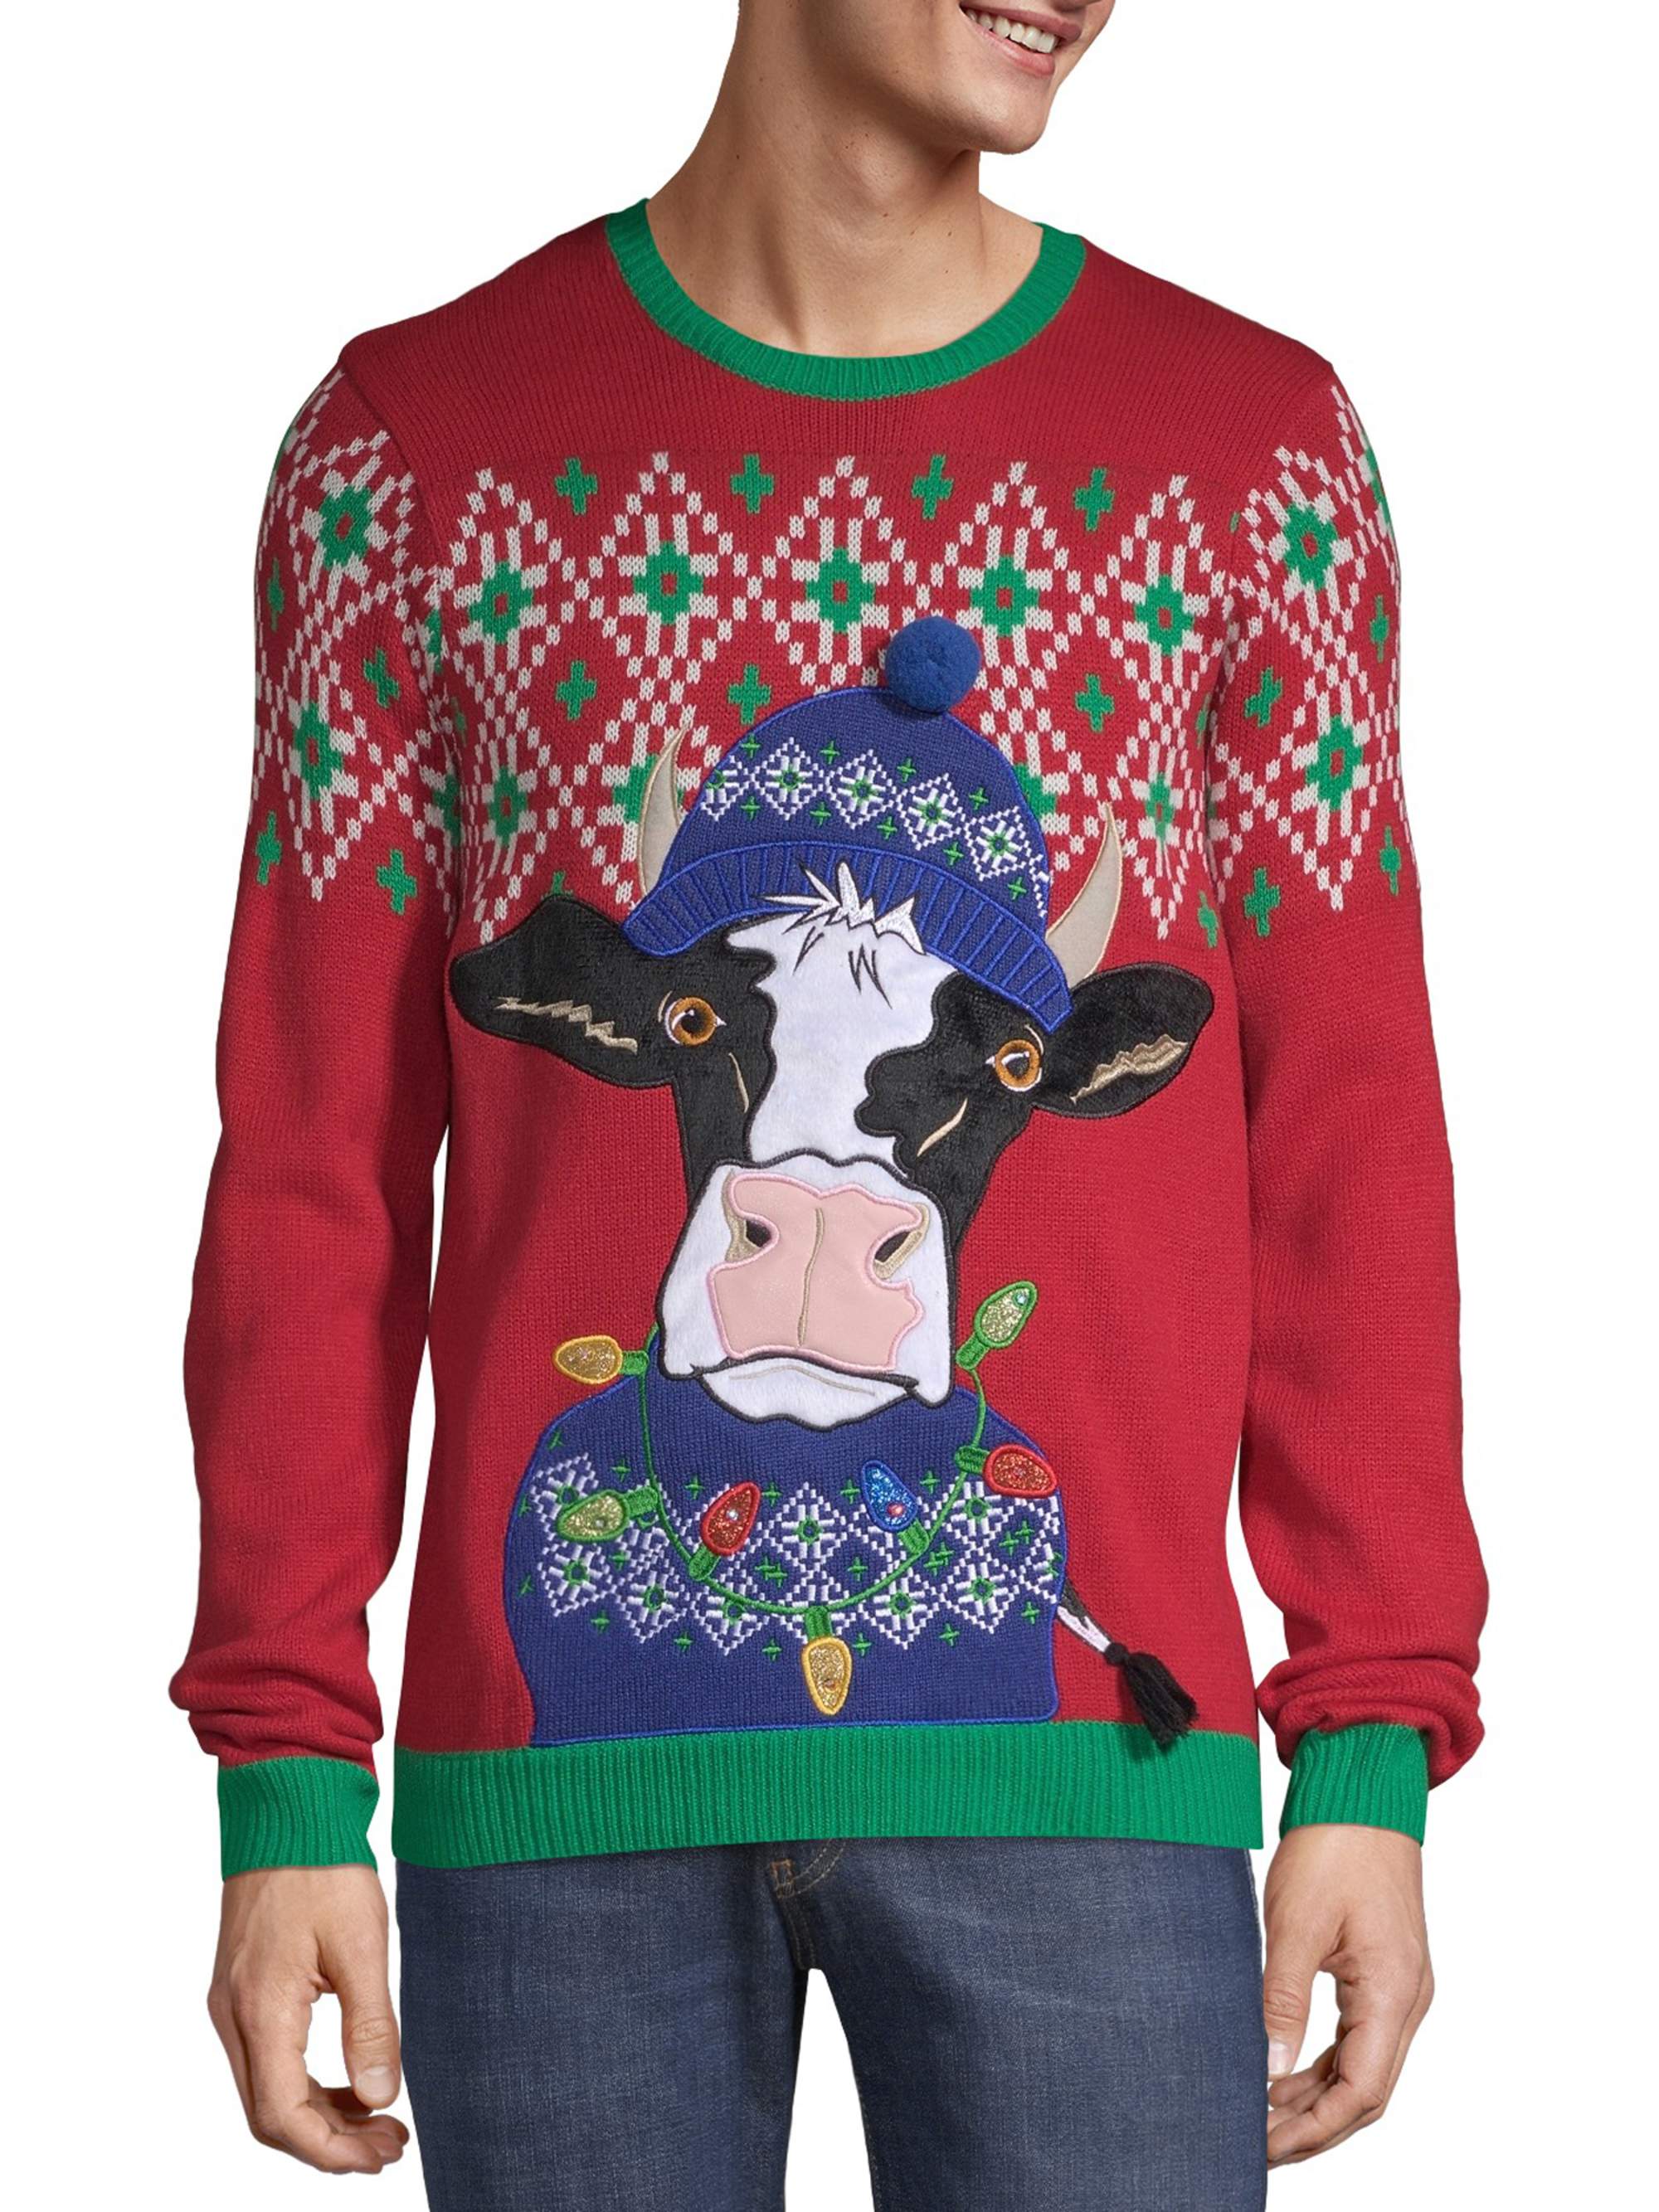 Holiday Time Men's Light-Up Cow Ugly Christmas Sweater - image 1 of 6